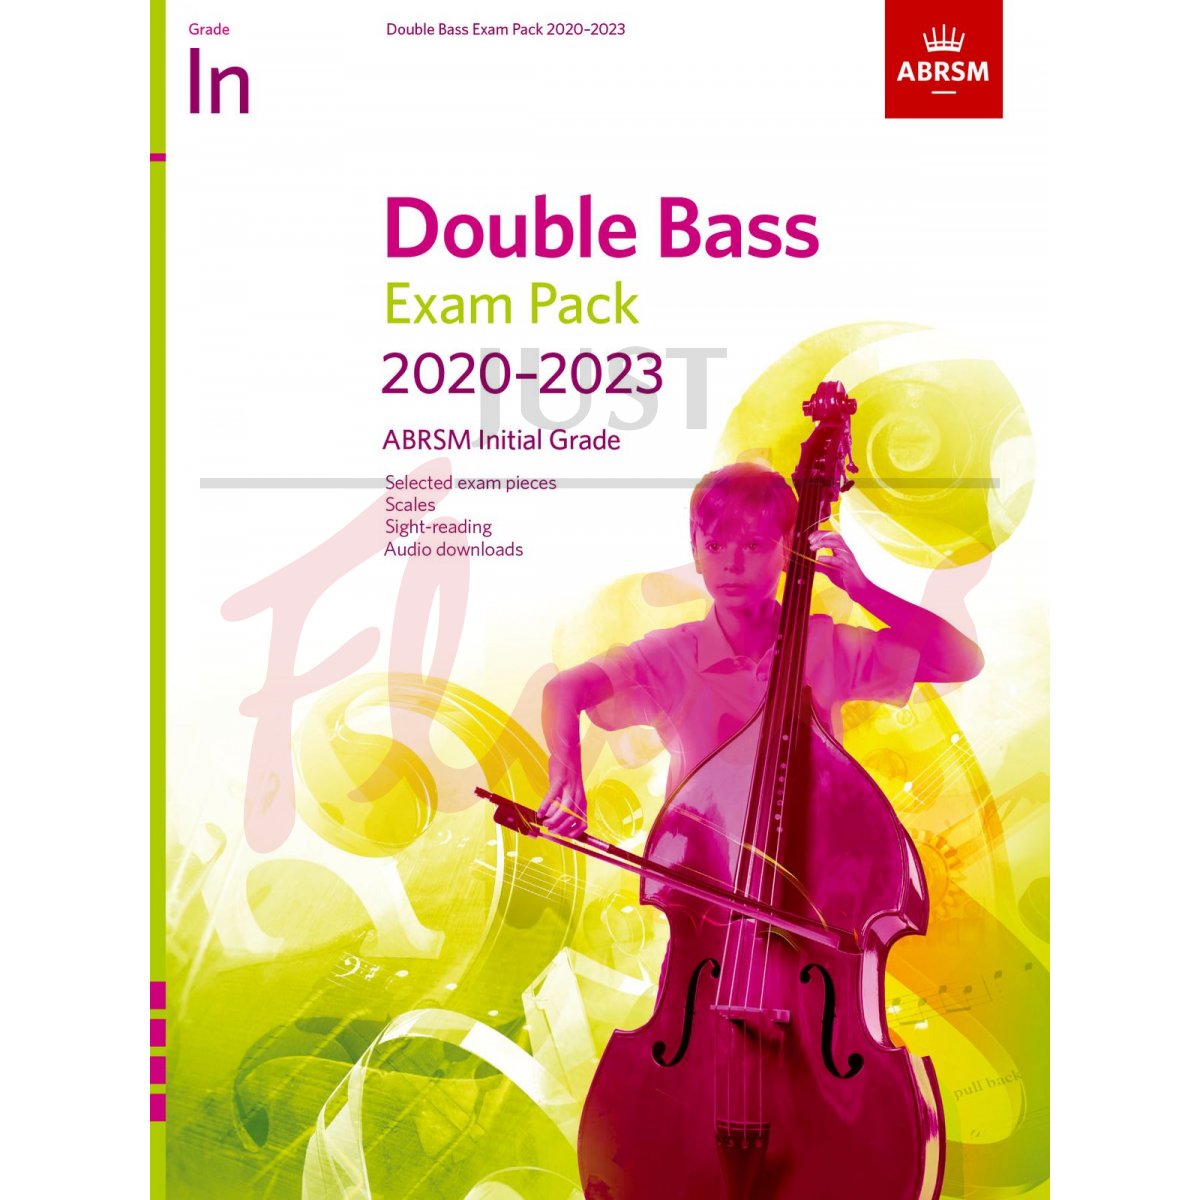 Double Bass Exam Pack 2020-2023, Initial